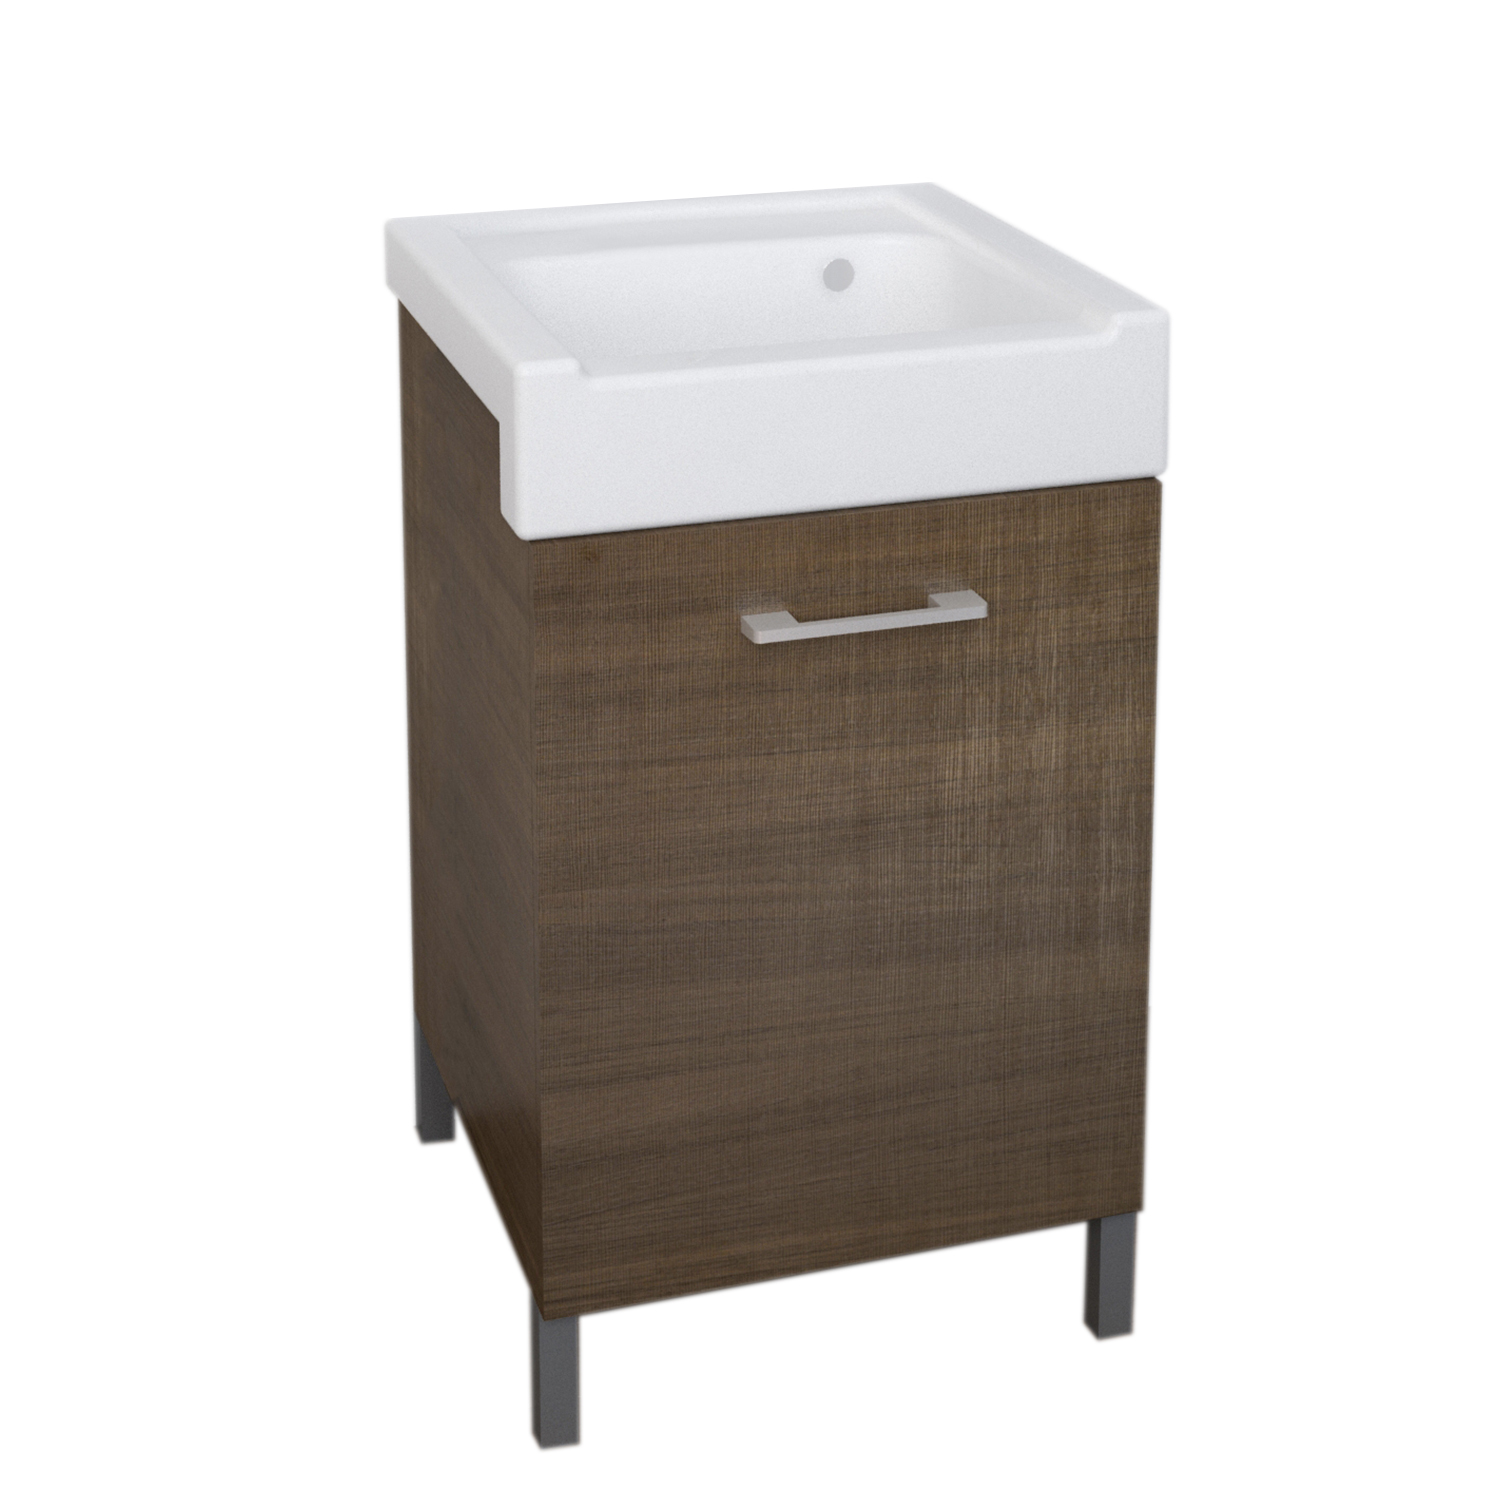 Ceramic sink with melamine wood cabinet and washing axis Lavarredo Xilon cm  50x50 different finishes